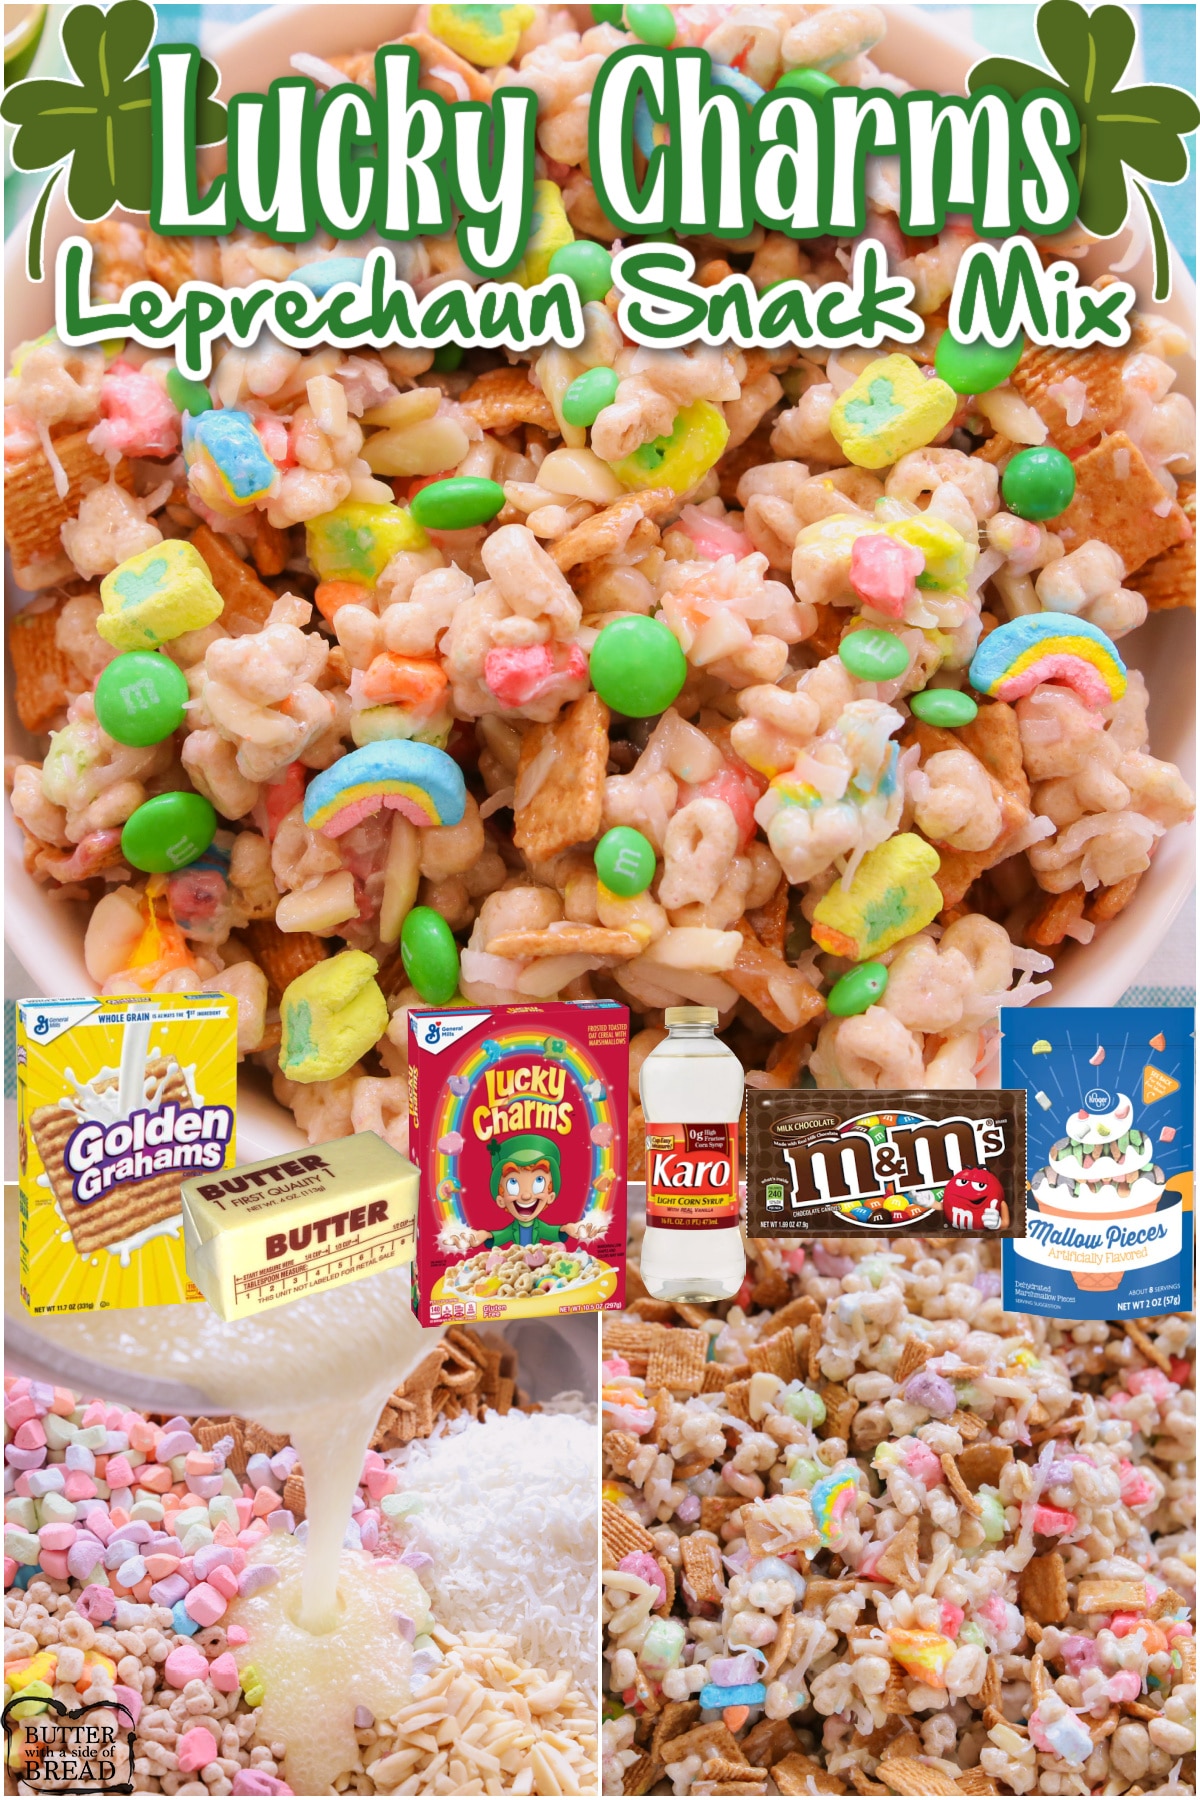 Lucky Charms Leprechaun Snack Mix is a fun twist on a classic perfect for St. Patrick's Day! Lucky Charms cereal, coconut, almonds & M&M's combine in a fun & festive sweet snack mix. 